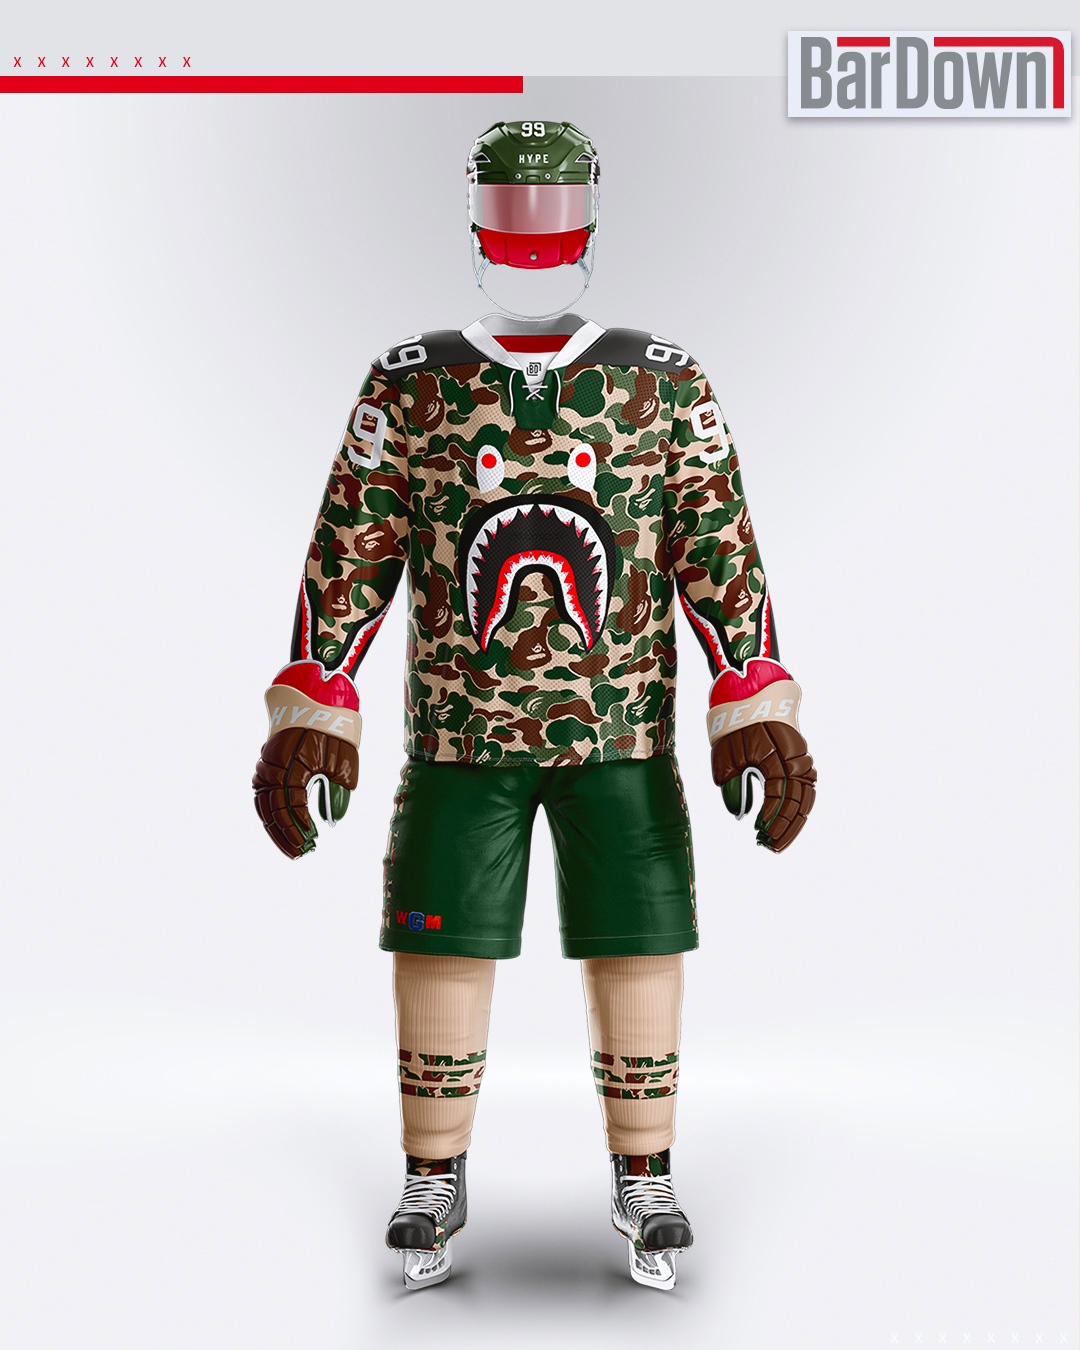 5 bizarre and fake NHL designs showing up on knock-off jersey websites -  Article - Bardown